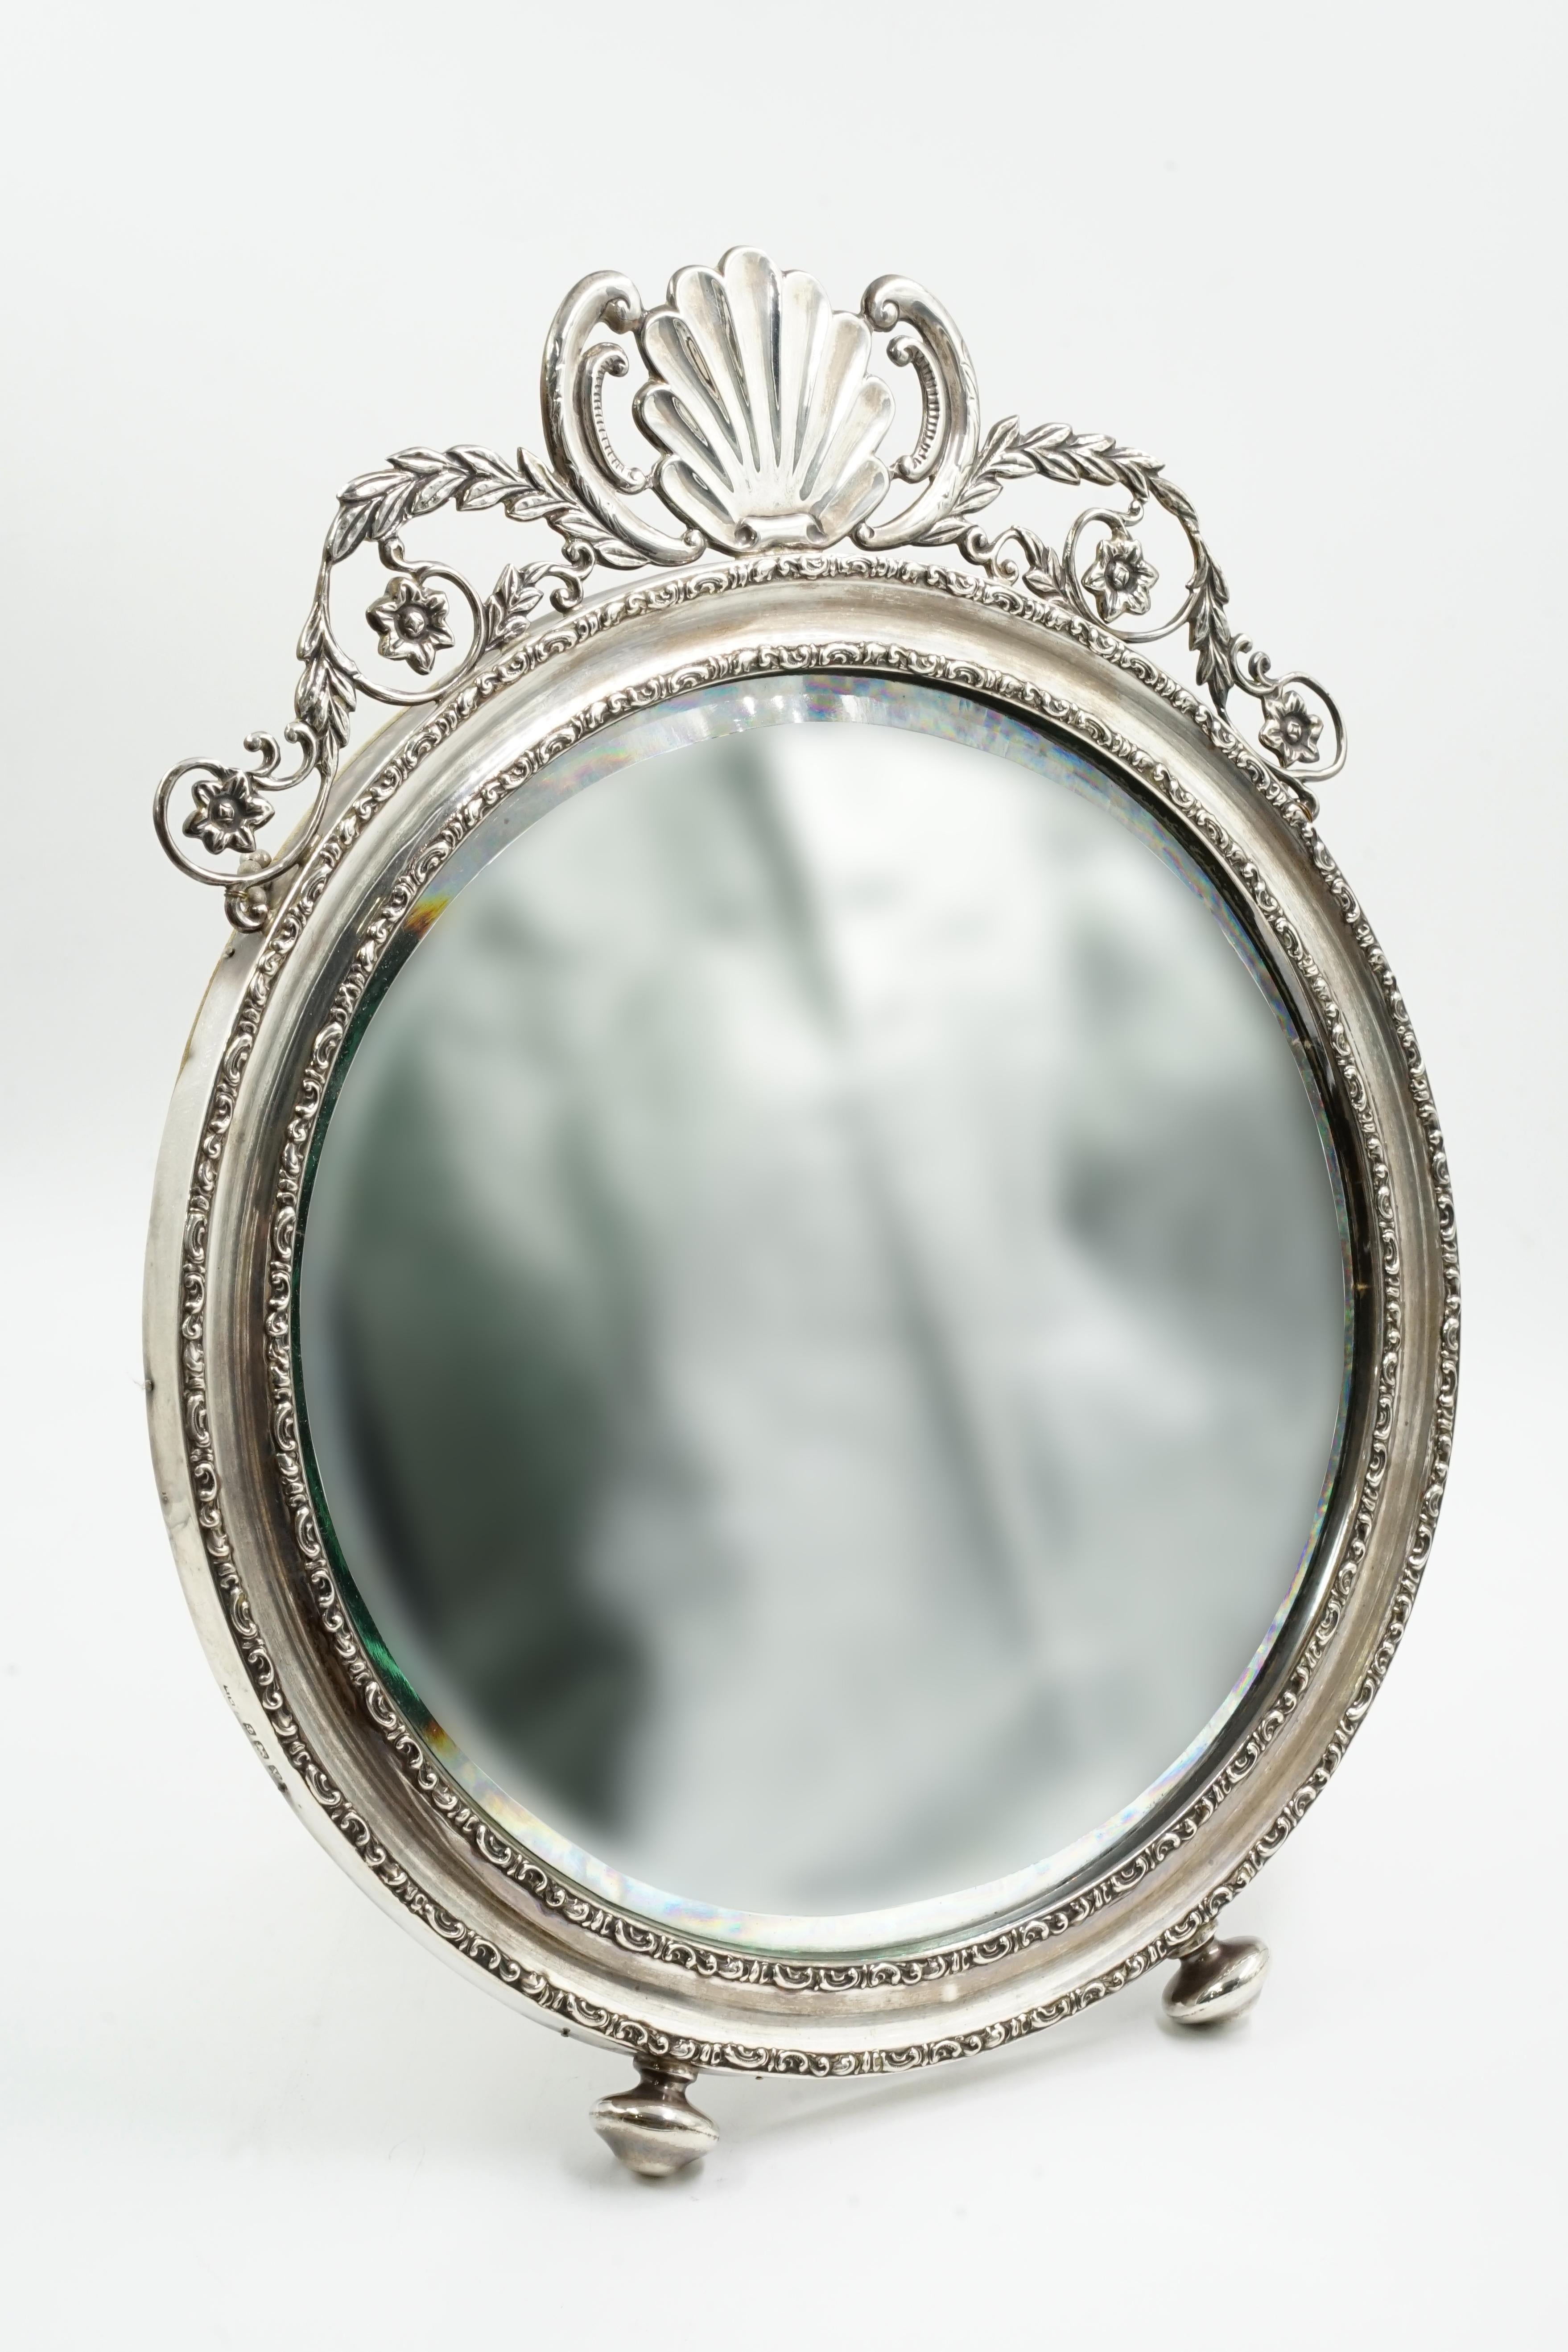 Victorian silver mirror
This mirror can also be hung on a wall.
Beautiful English mirror
Circa 1940 Origin England
It has two front supports and one back lined with corduroy.
It also has a chain on the back so you can hang it.
It is in excellent